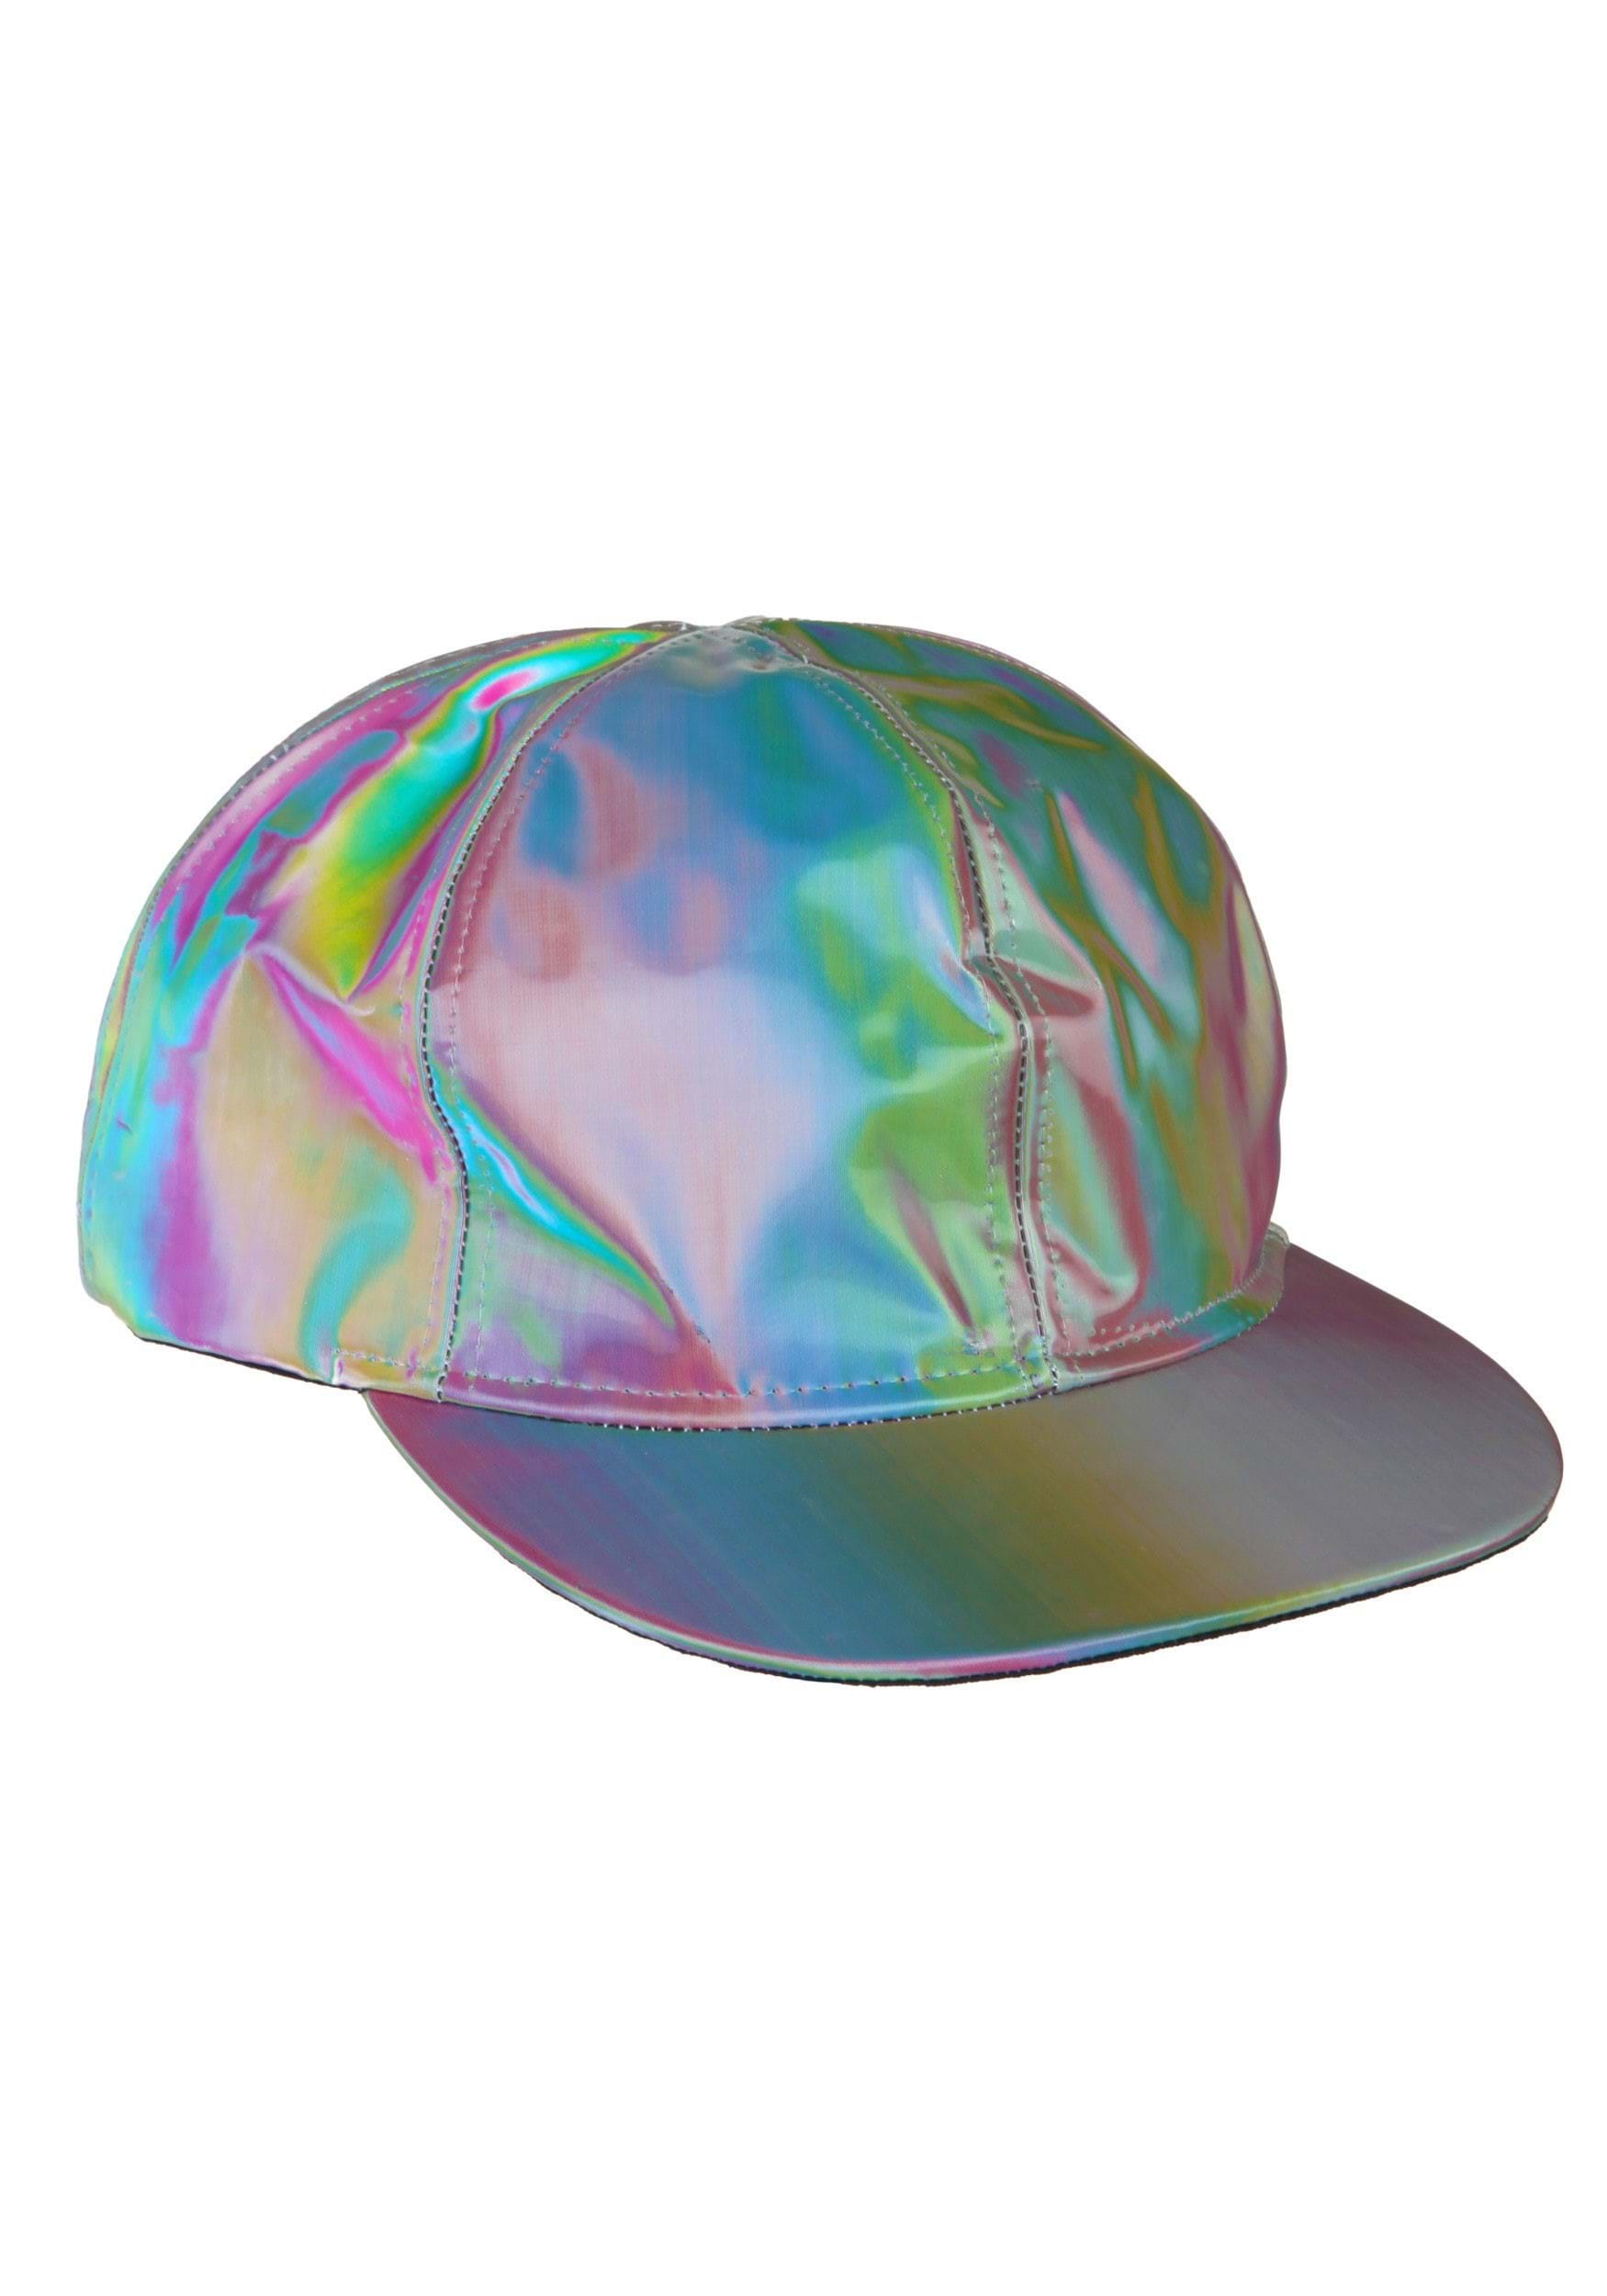 Marty McFly Child Hat from Back to the Future